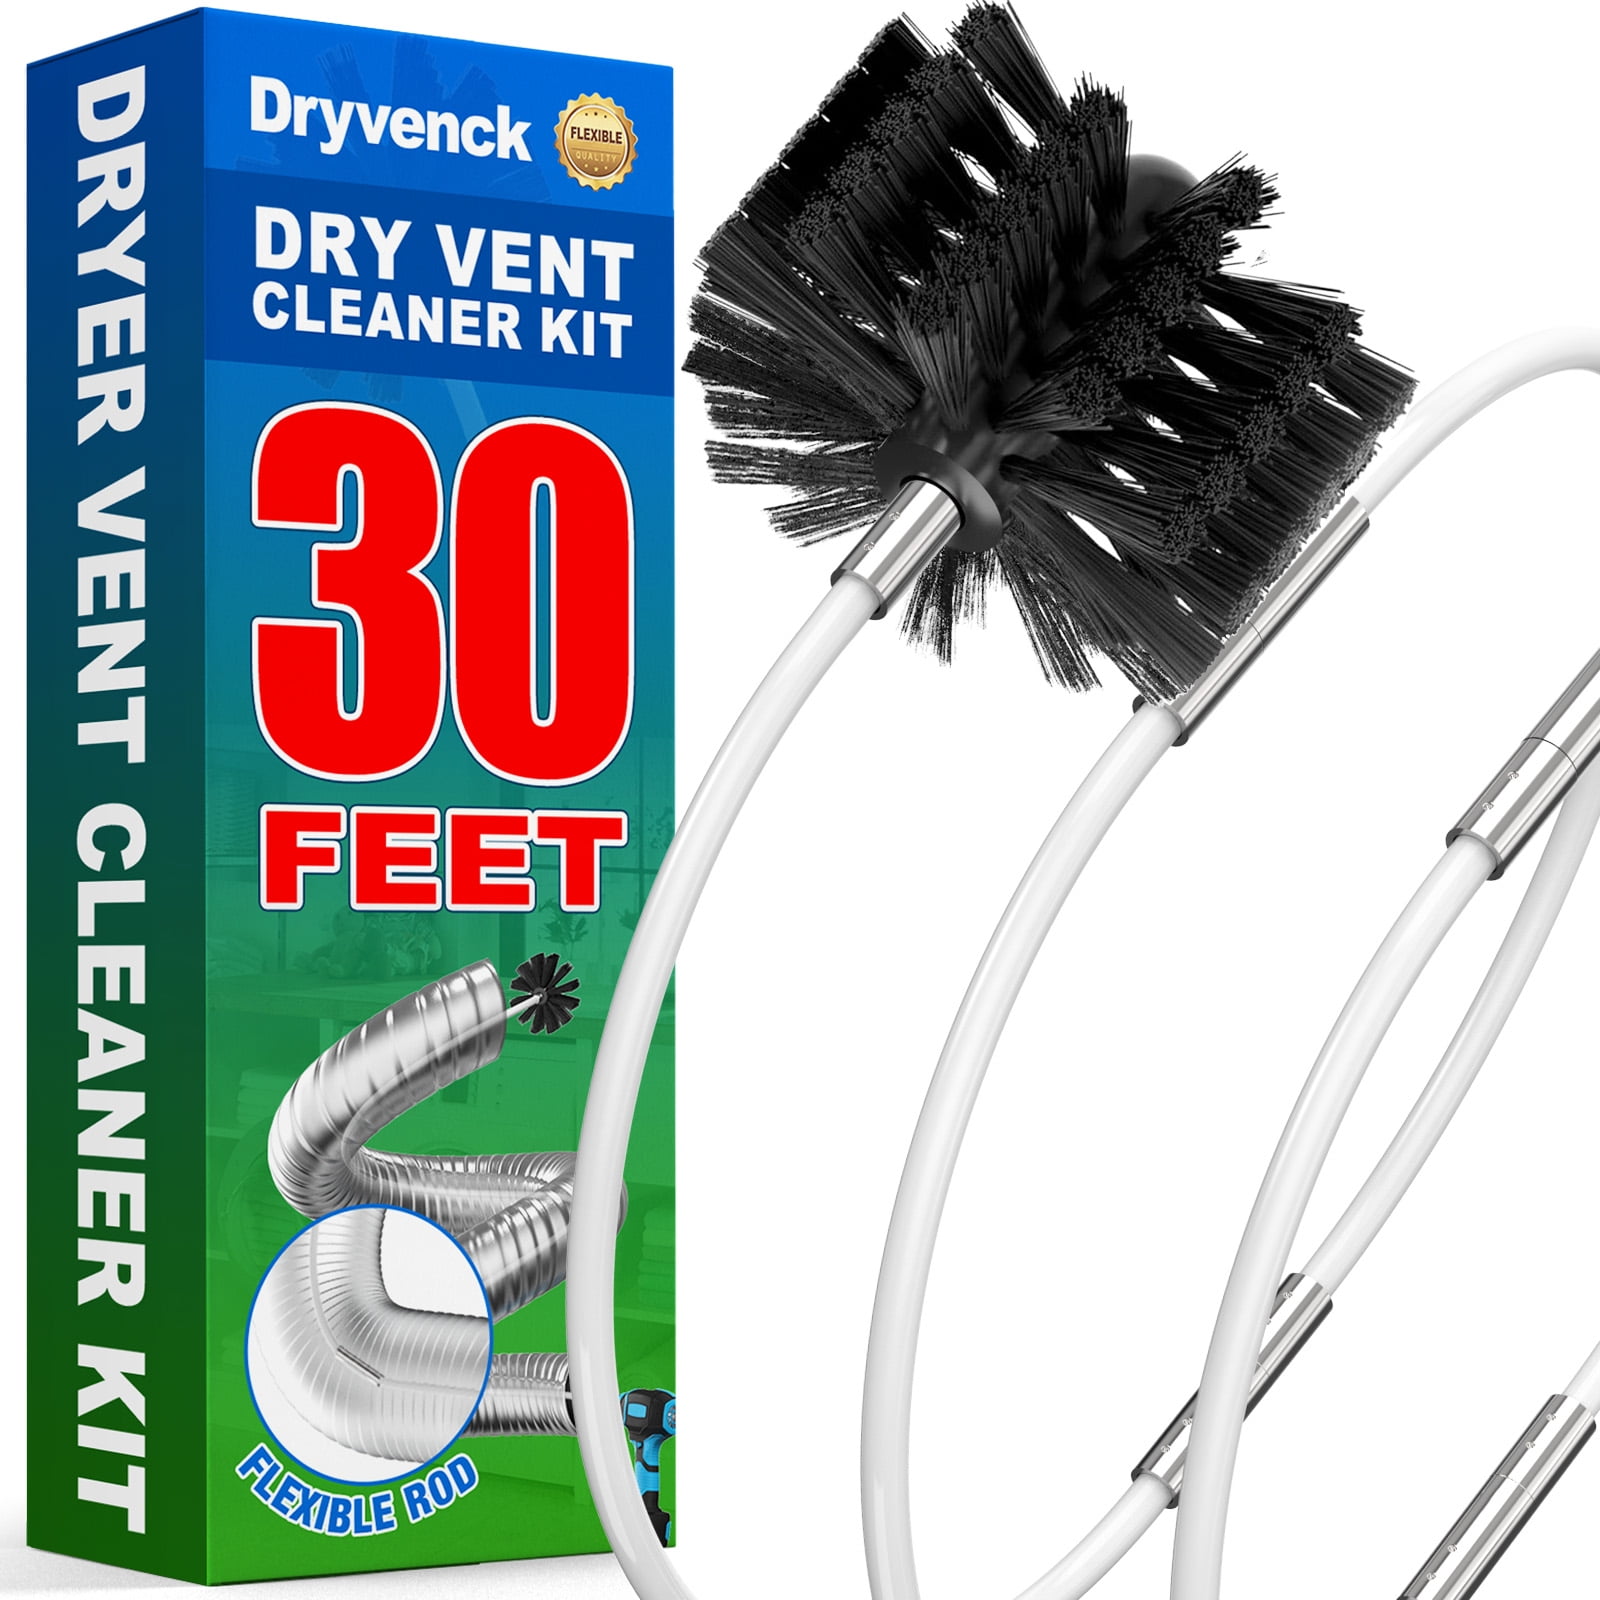 Pro-Spin Dryer Vent Cleaning Kit